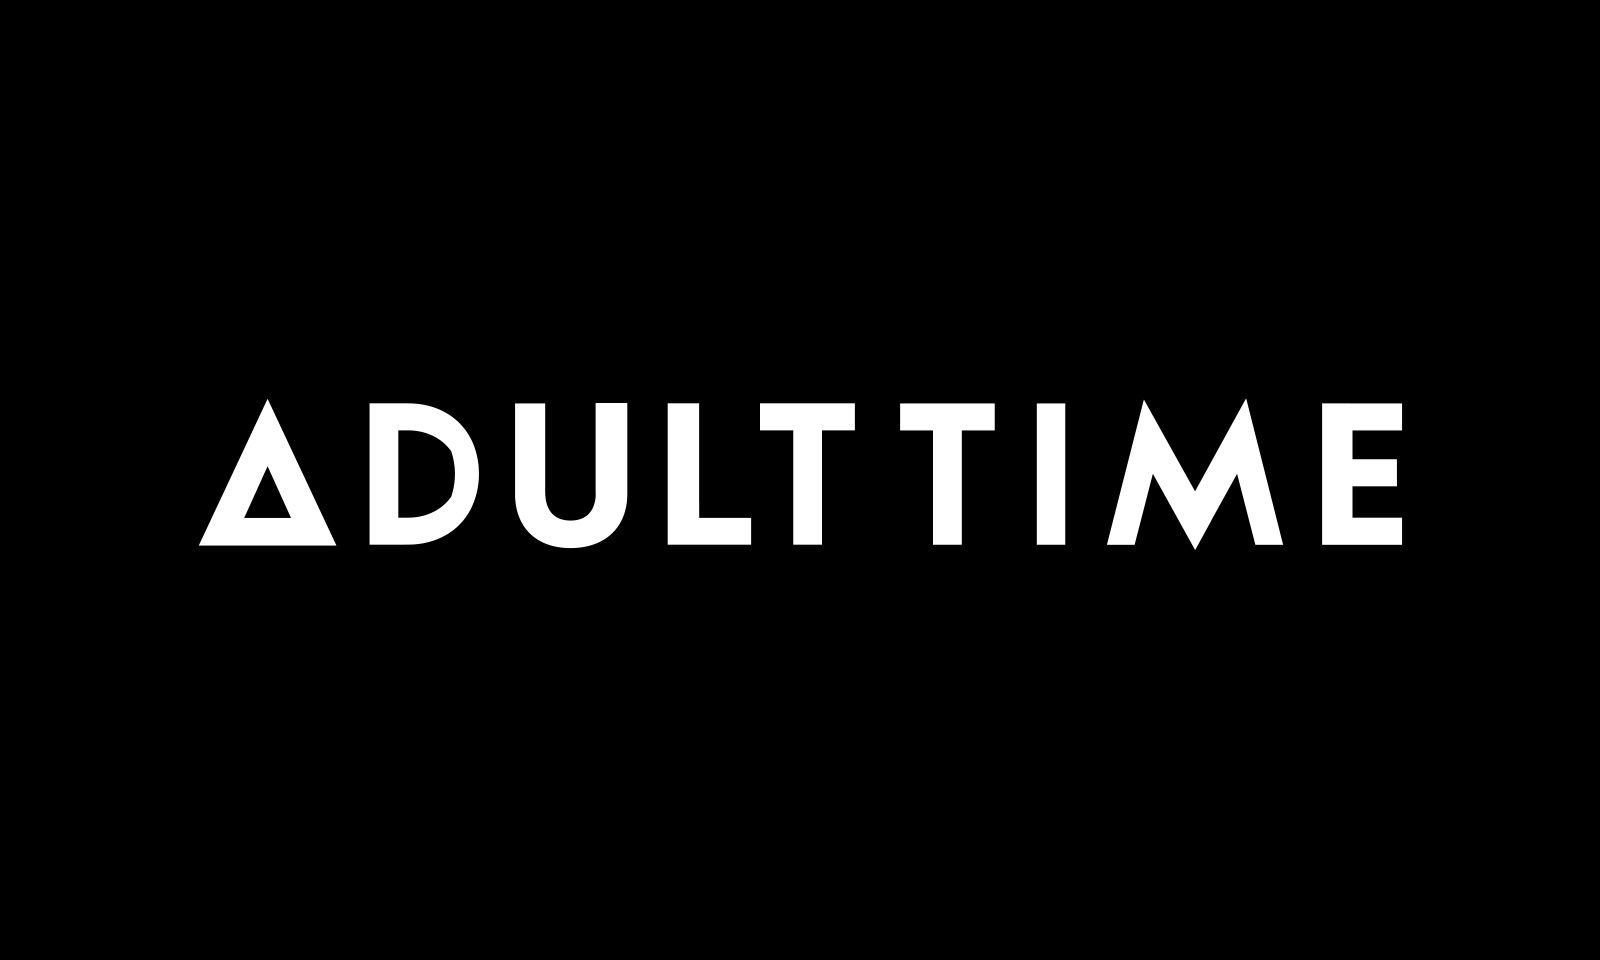 Adult time